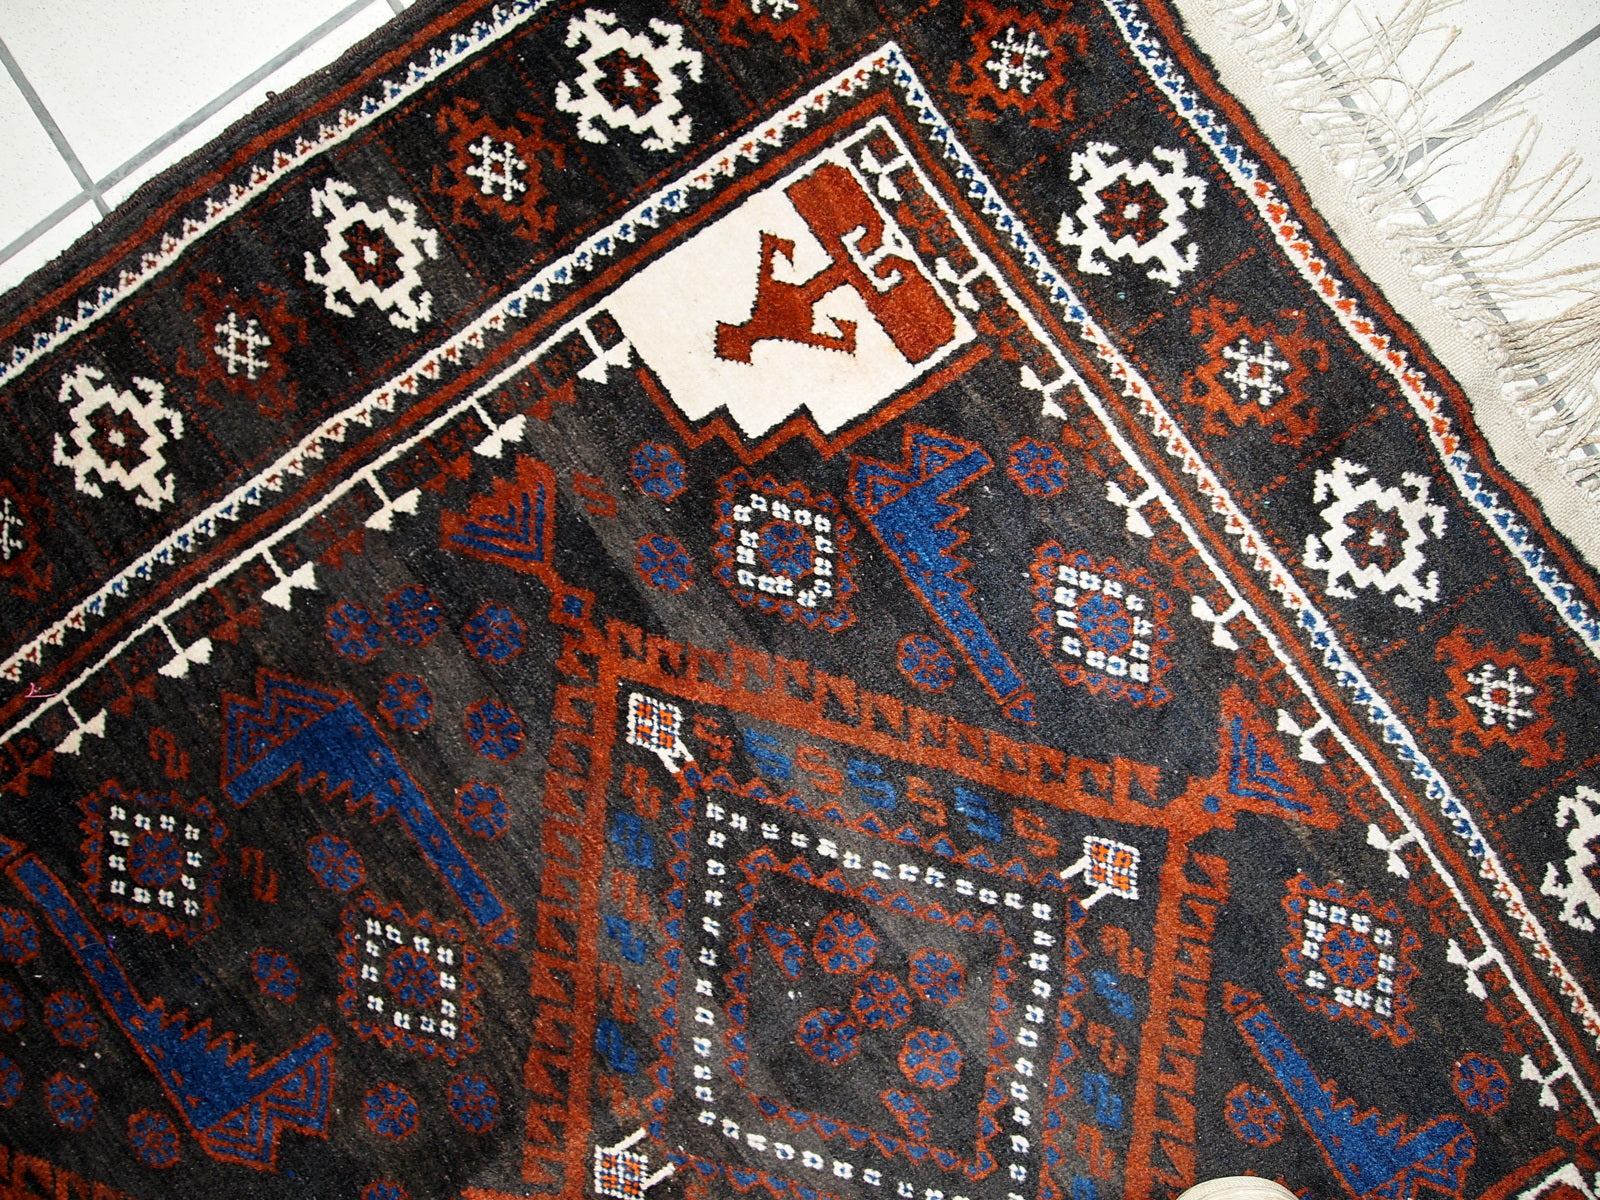 Close-up of intricate tribal figures in rusty red on the Afghan rug.